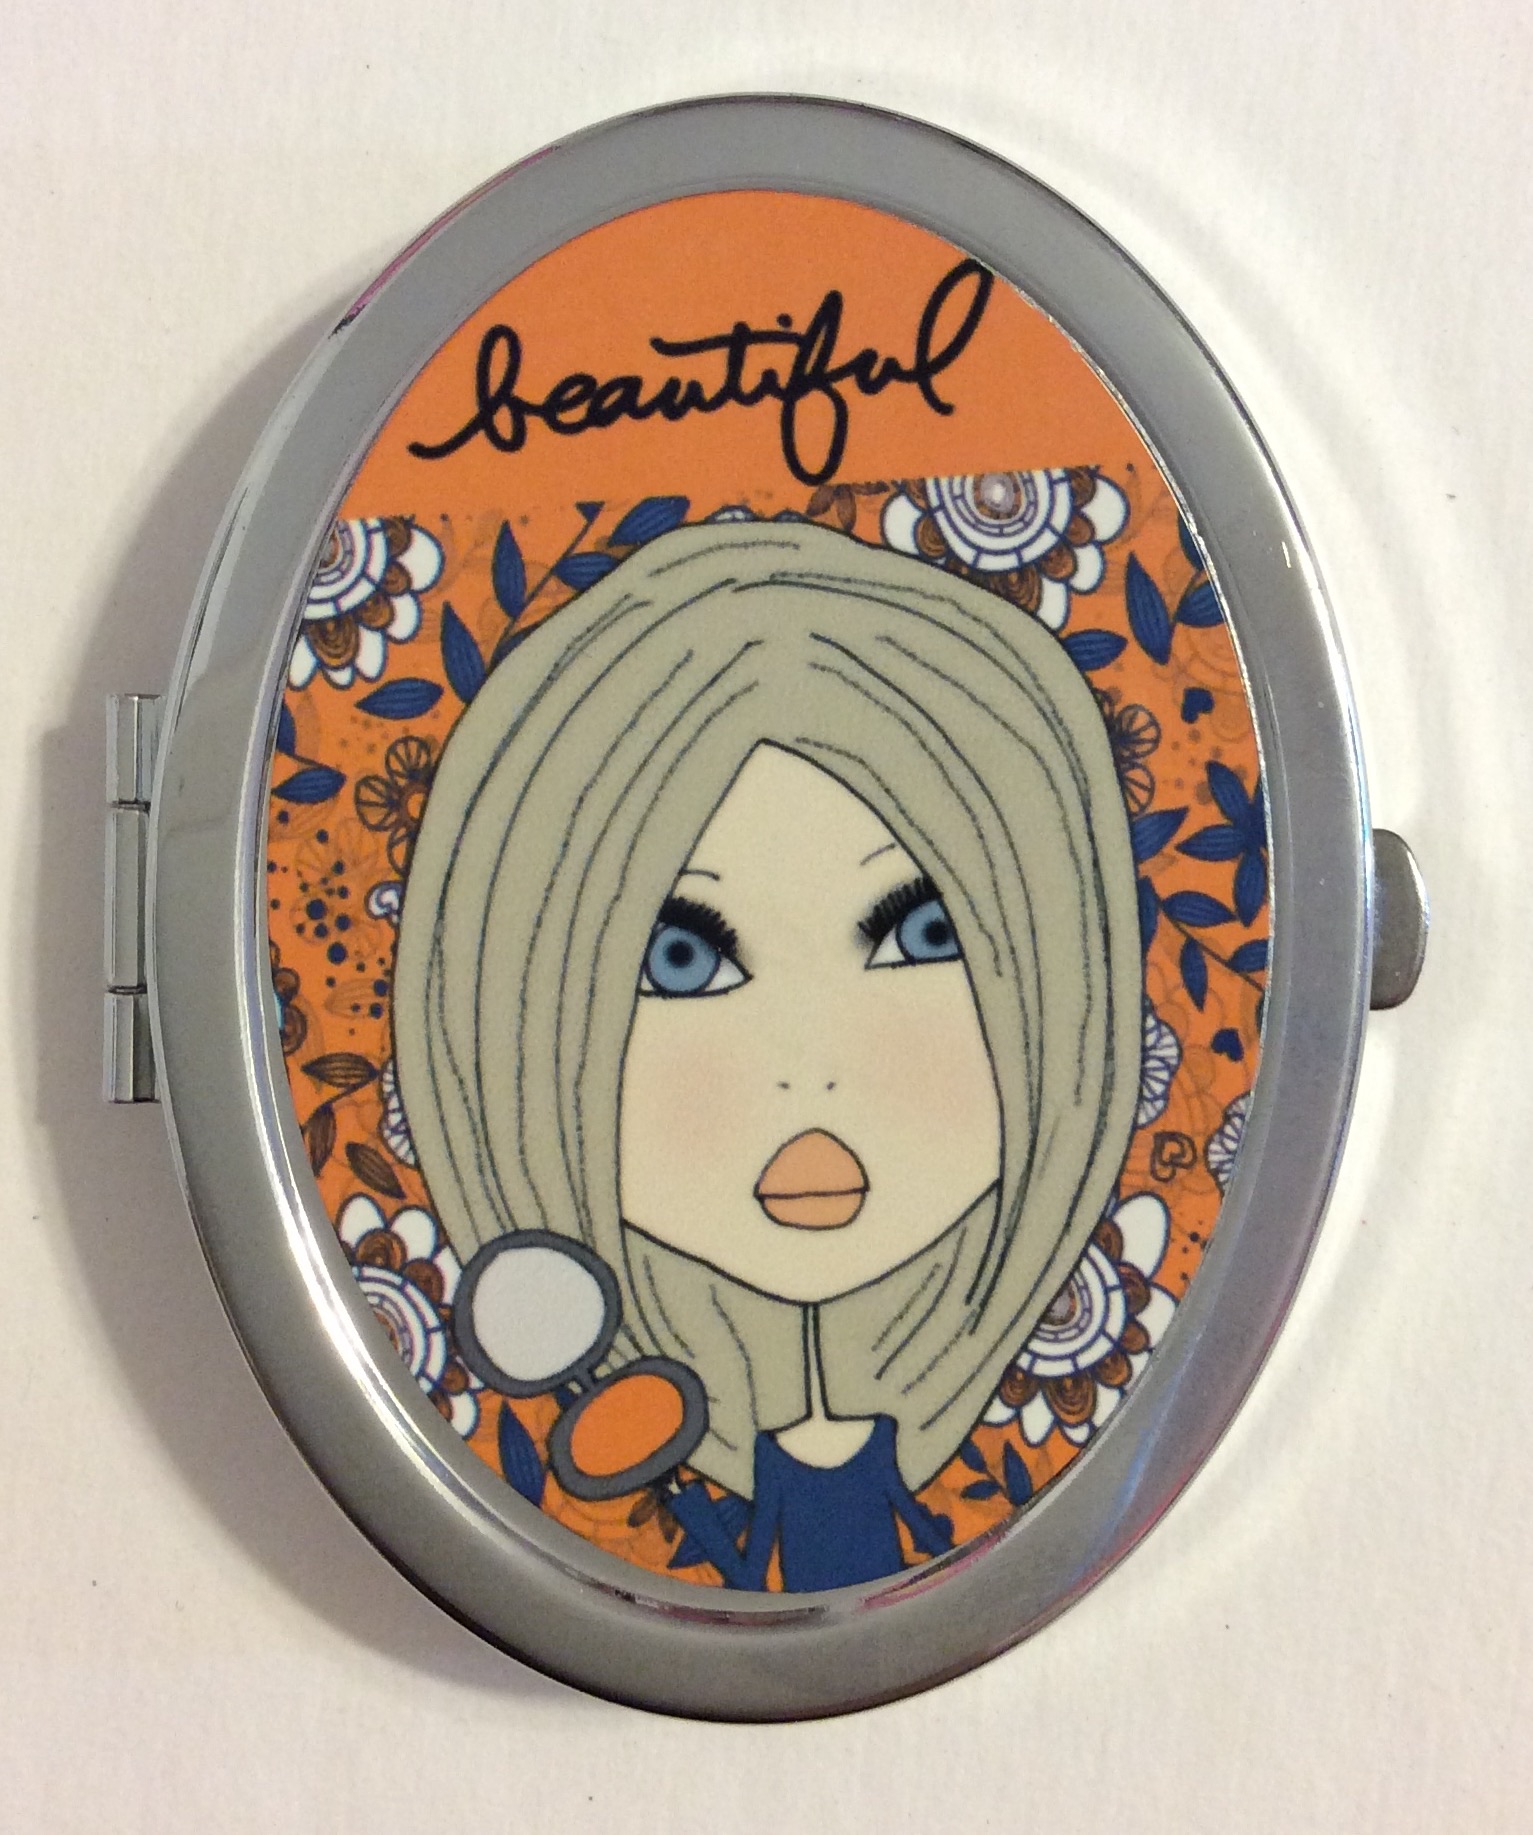 Compact Mirror made with sublimation printing